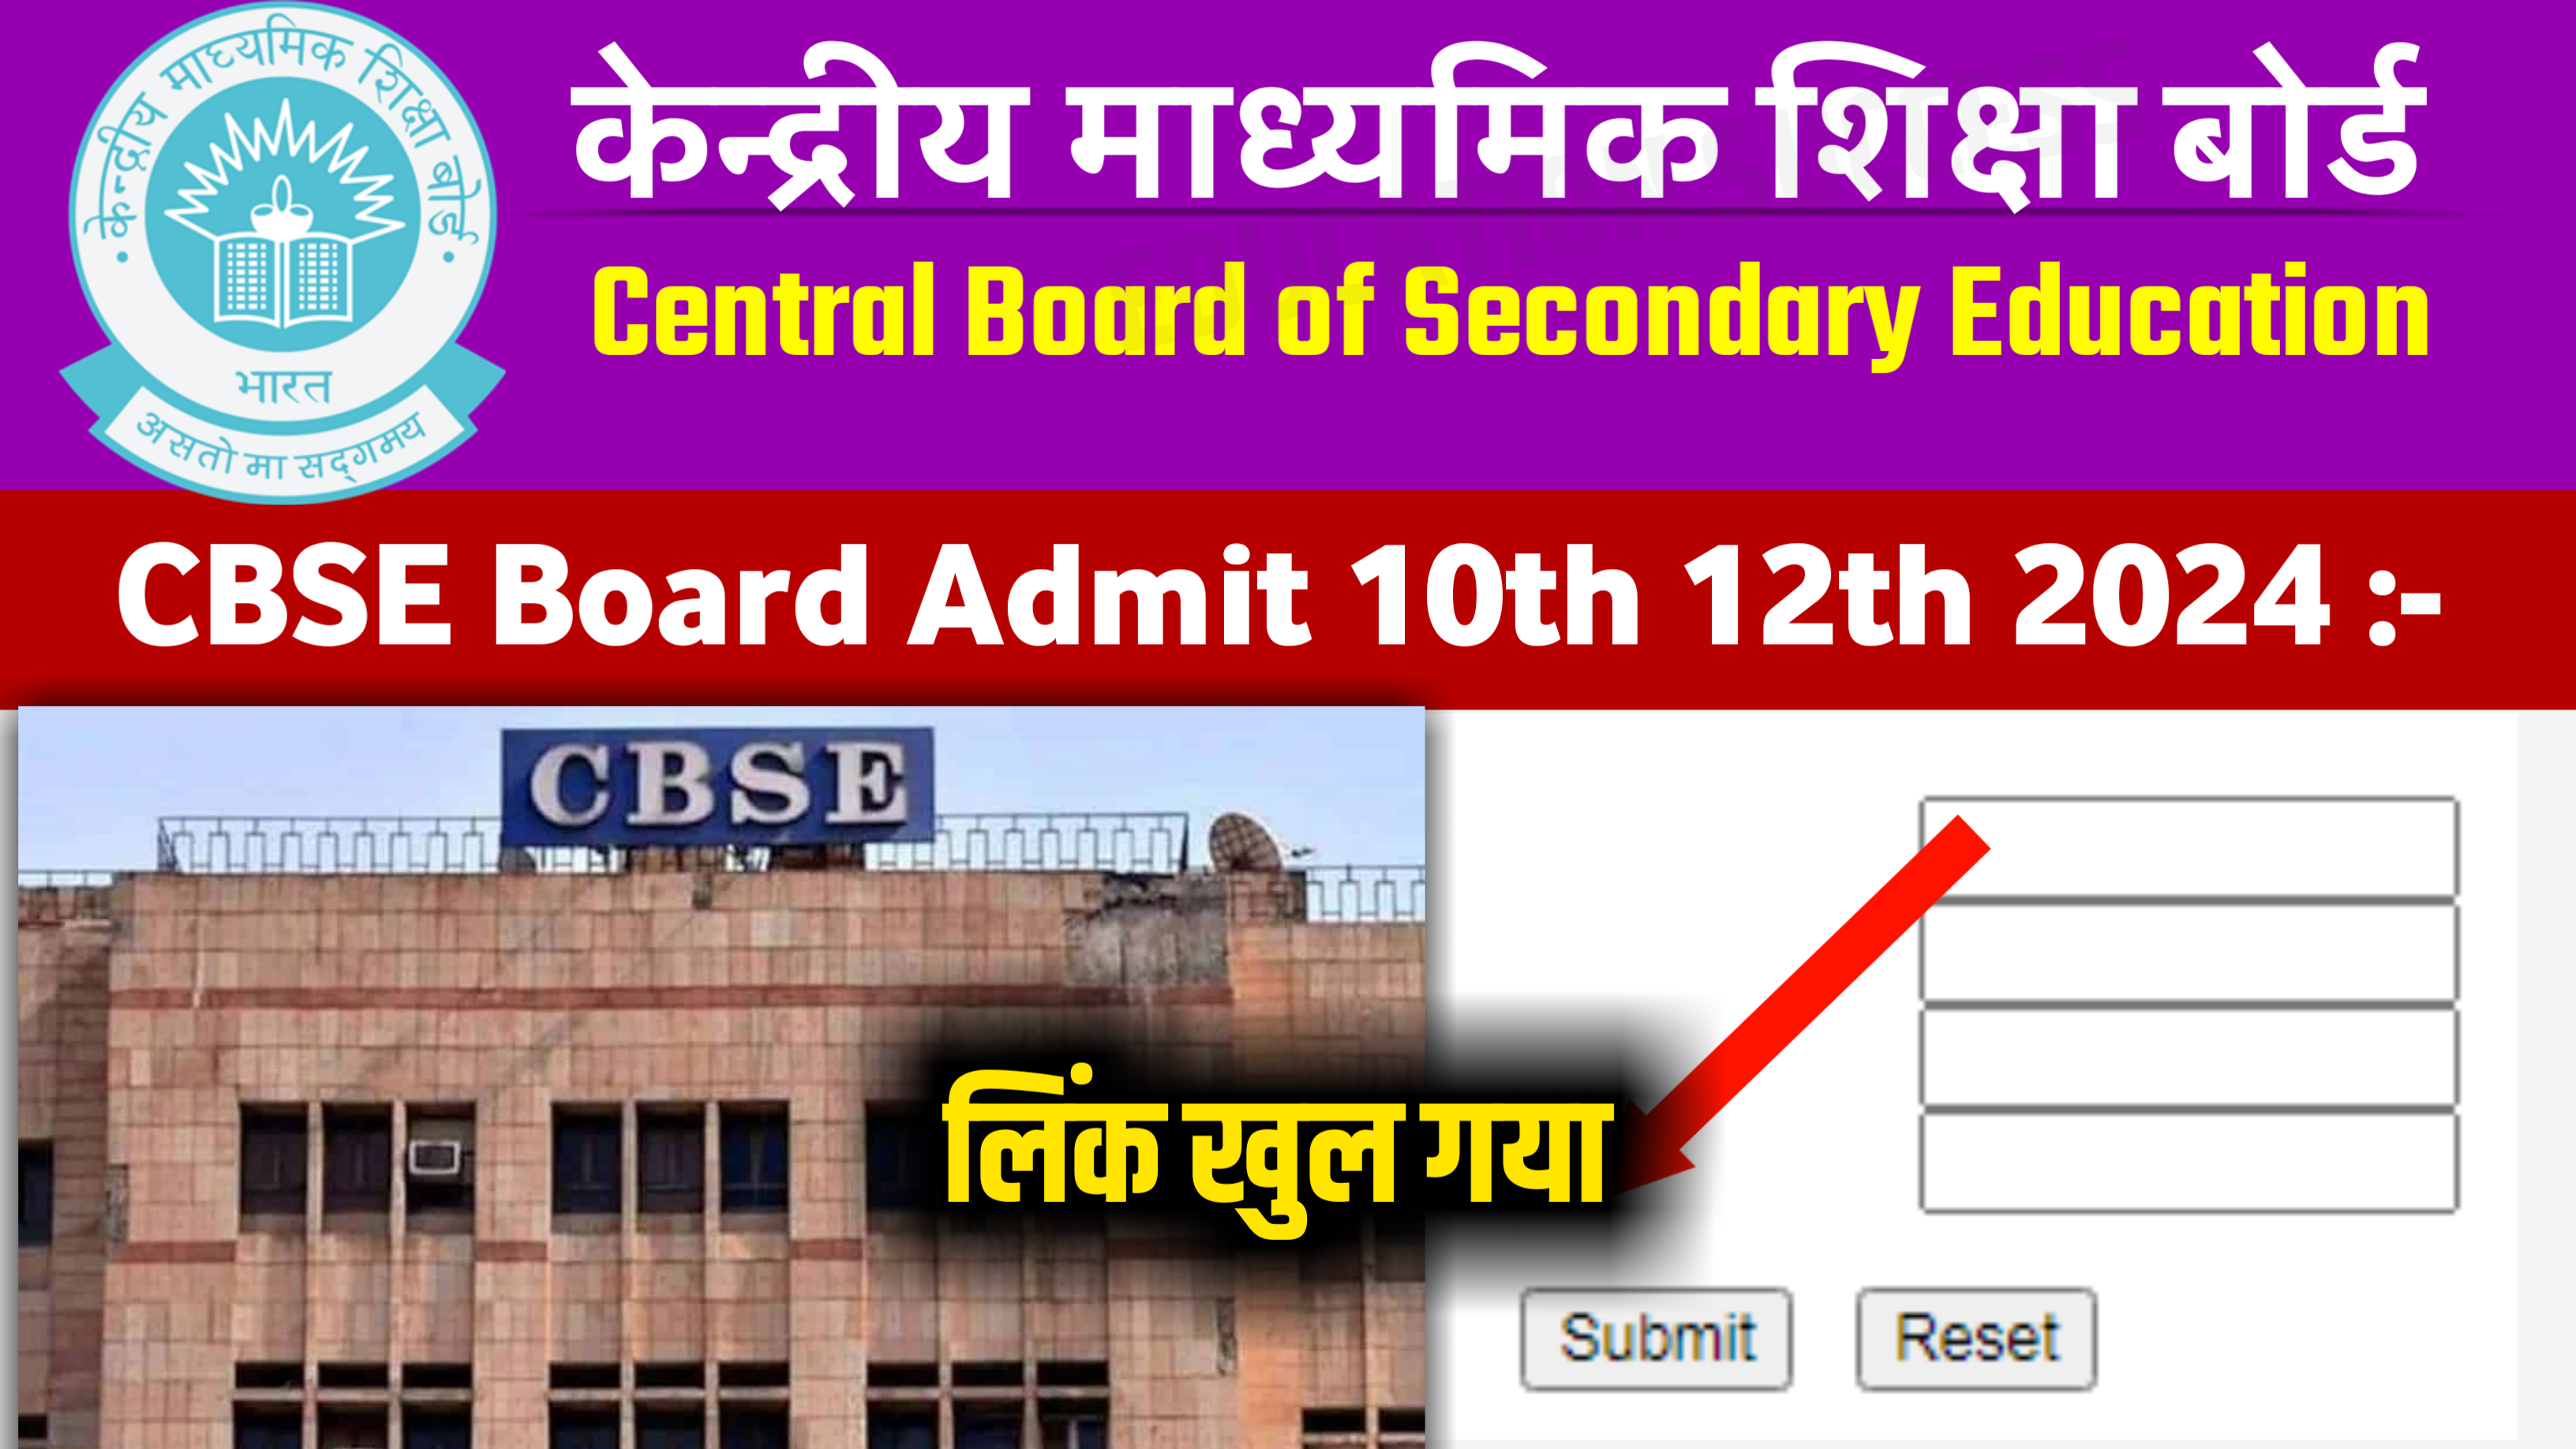 CBSE Board 10th 12th Admit Card Out Today Link Active: